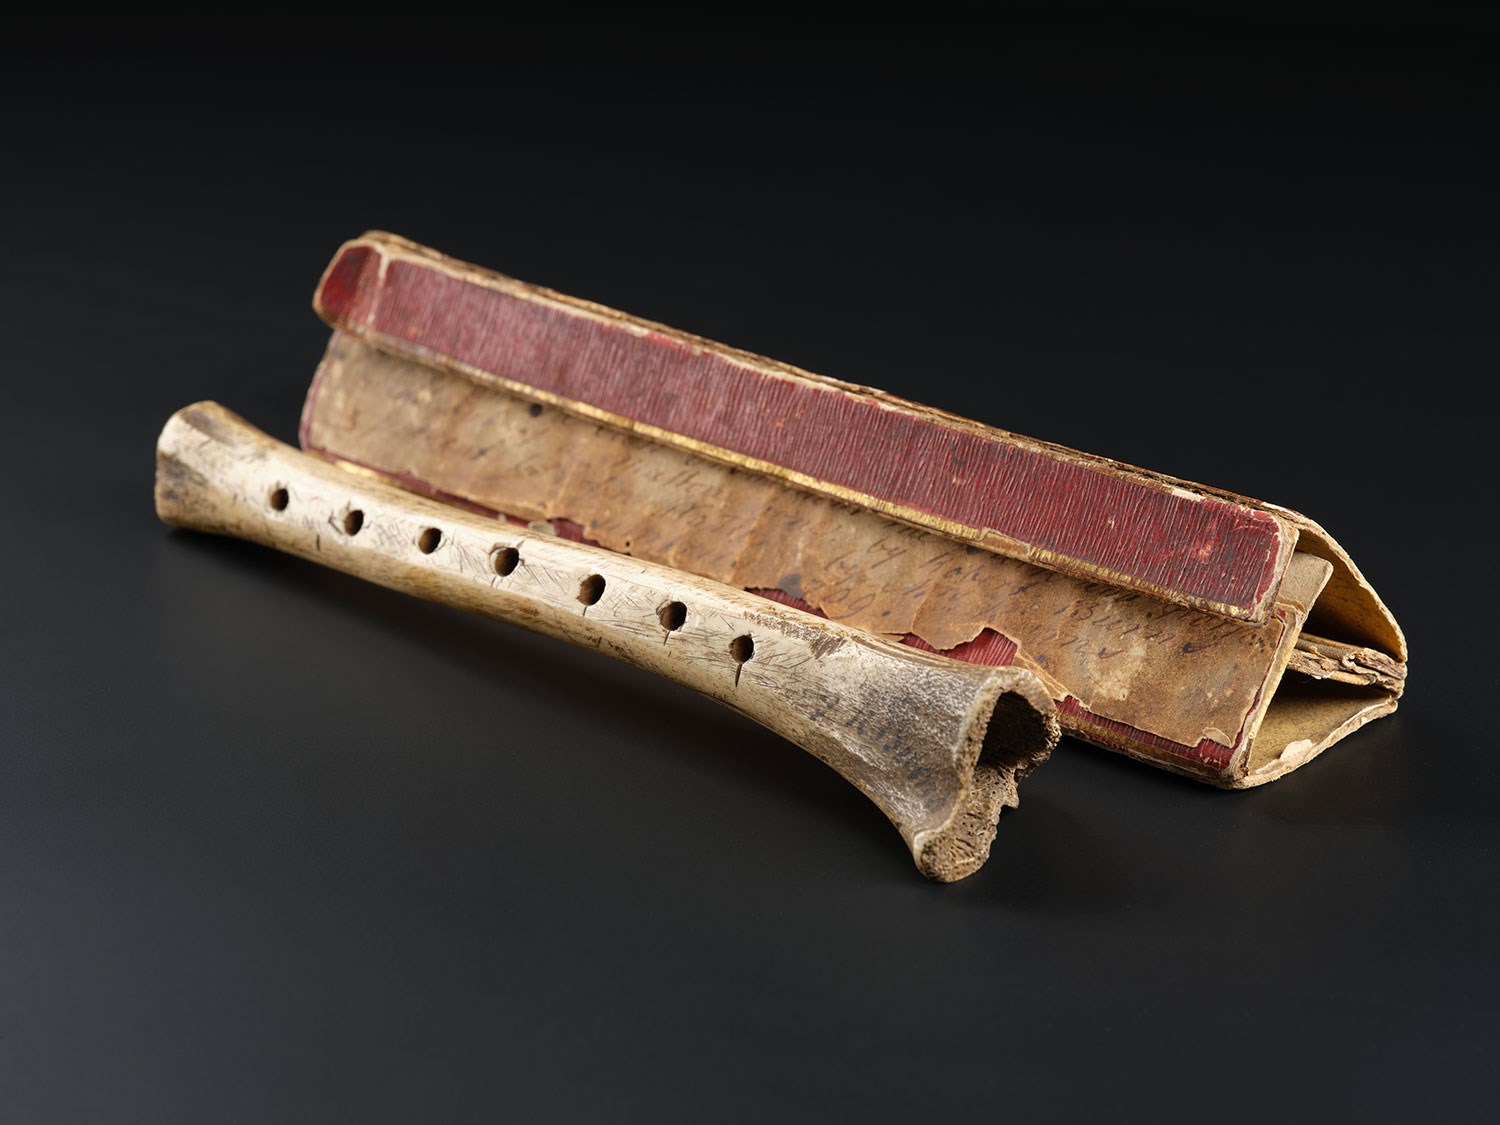 Burns had a profound interest in traditional Scottish folk music. He purchased this chanter made from sheep's bone in the Braes of Atholl in Perthshire. He had been searching for a chanter like this for many years and wrote to a friend that it ‘is exactly as shepherds were wont to use in the country’.